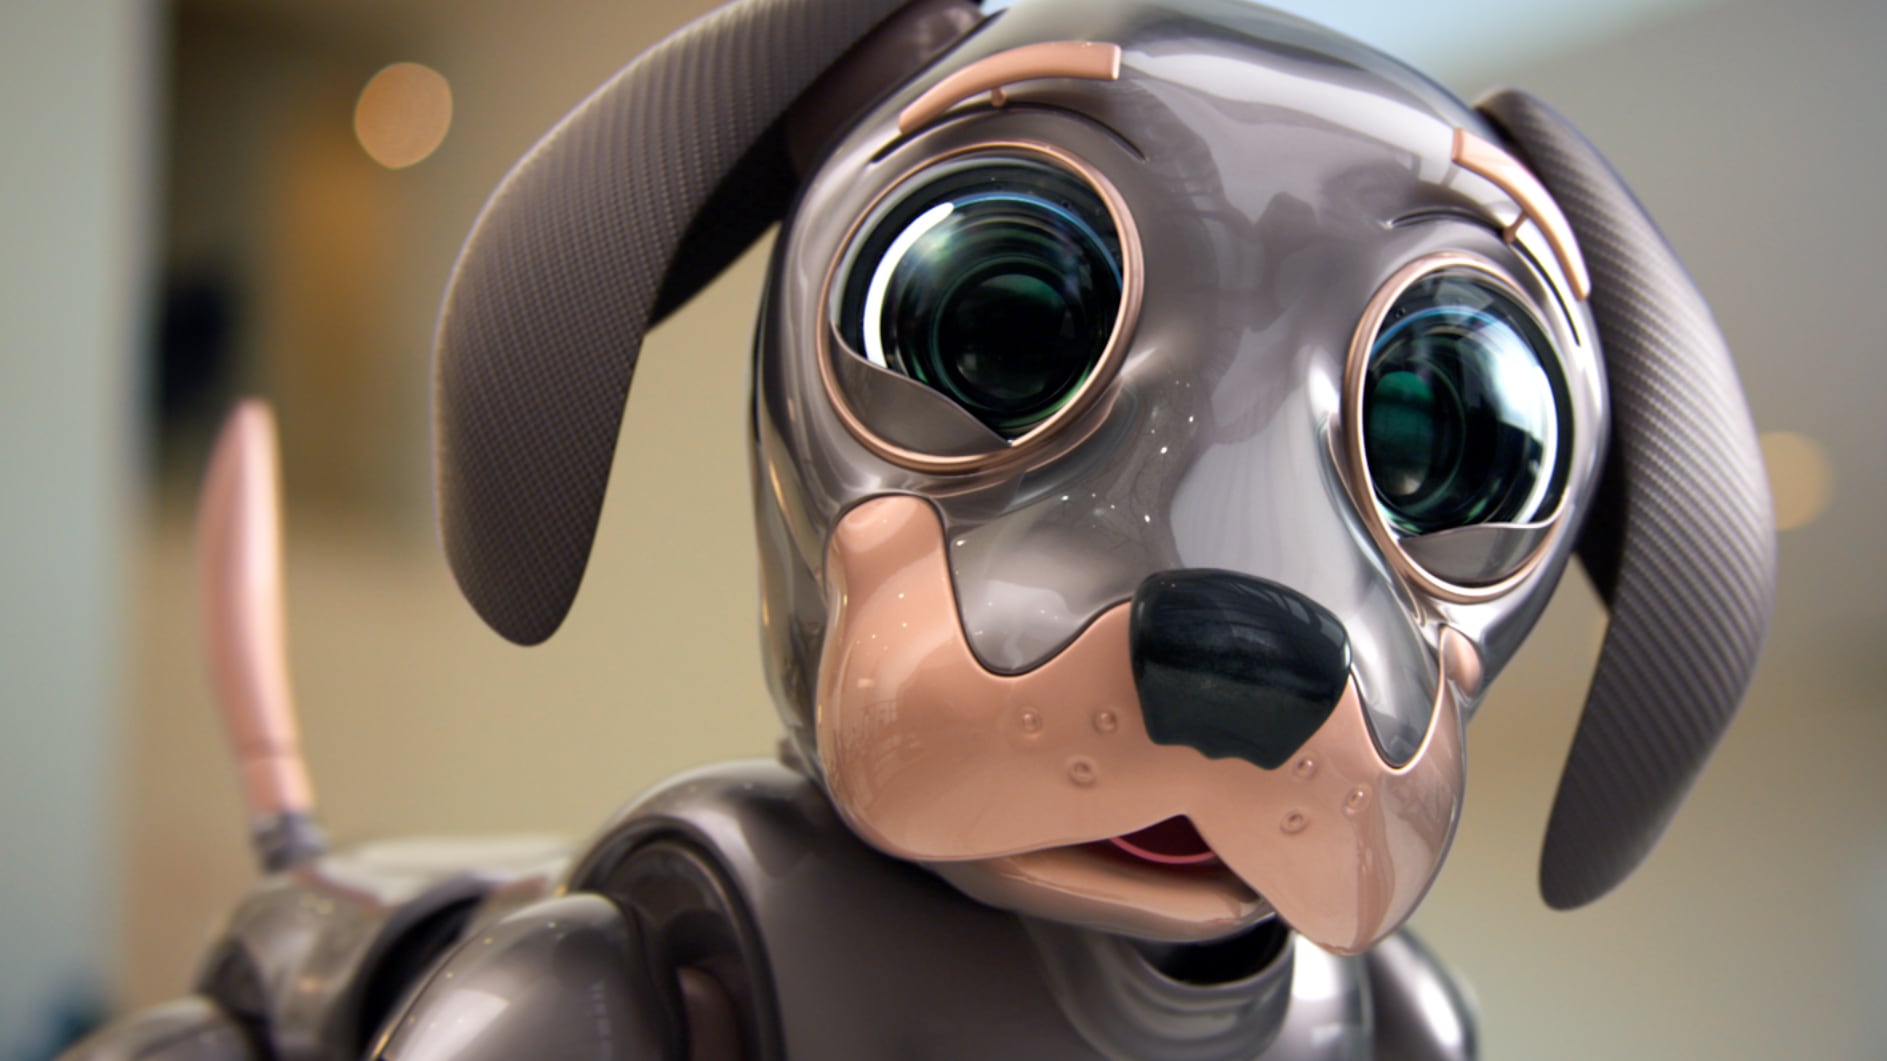 Kia launches “Robo Dogmented Reality” experience for Super Bowl